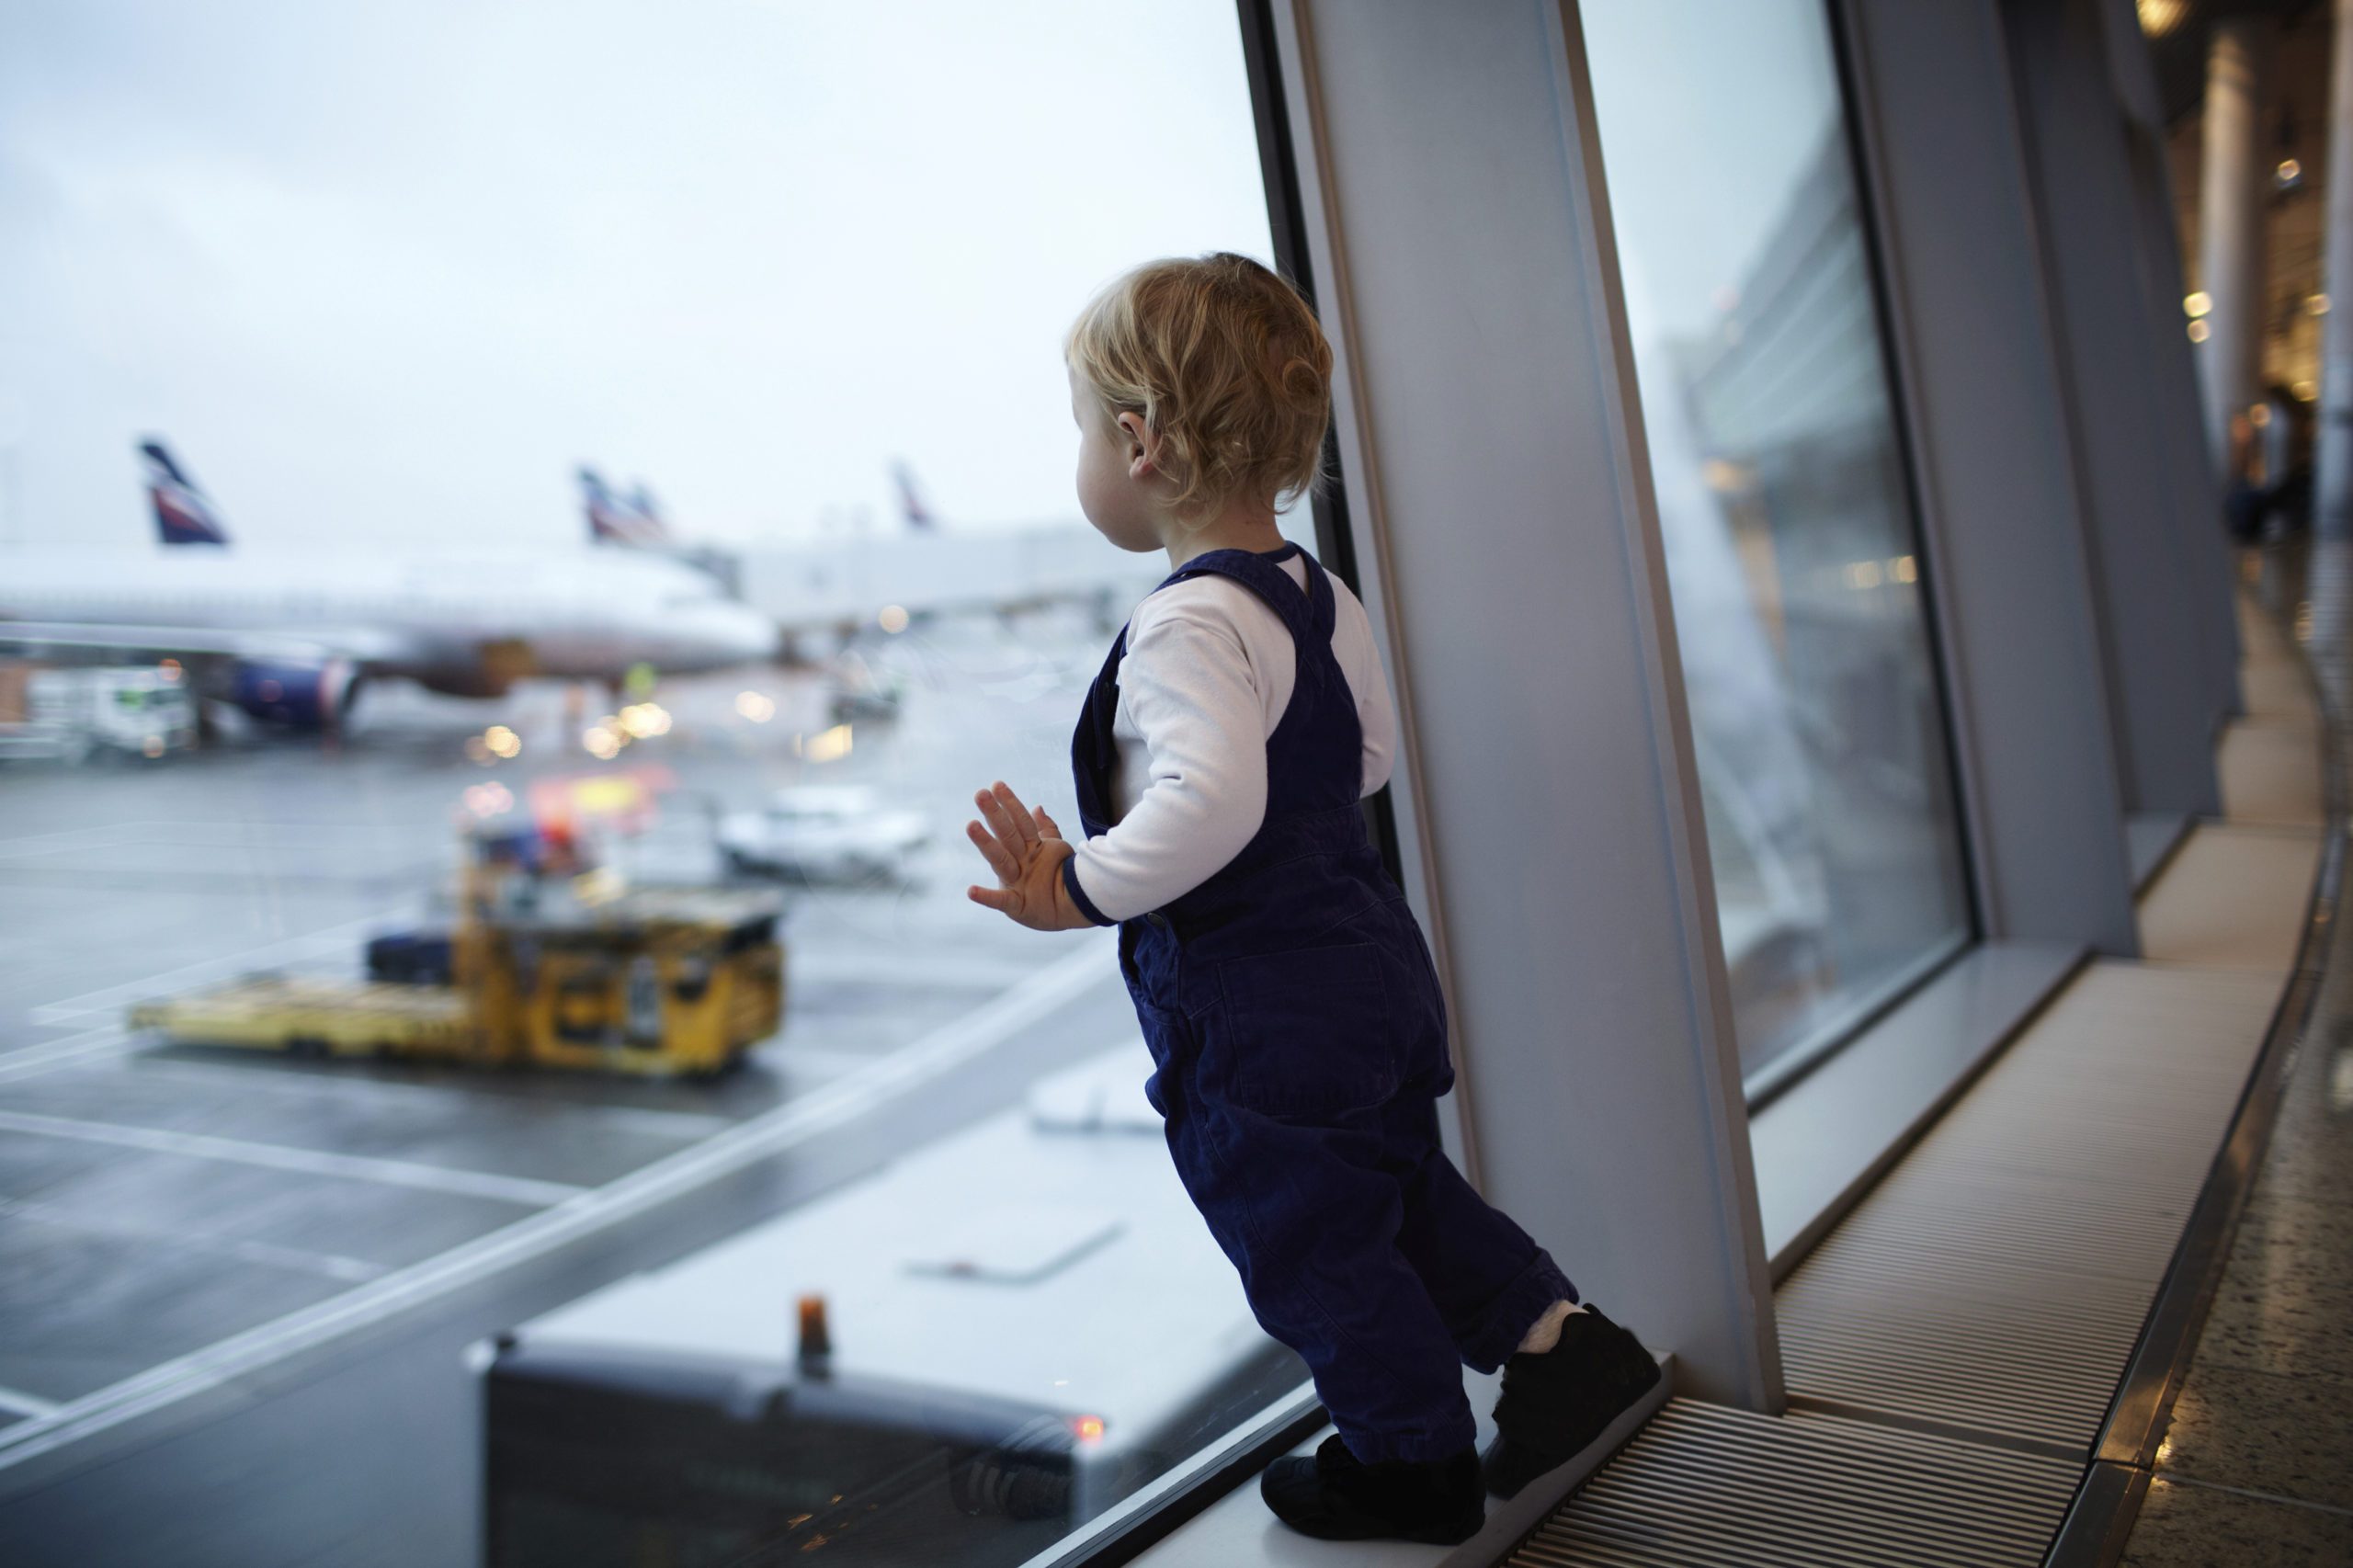 Kid near the window in the airport.